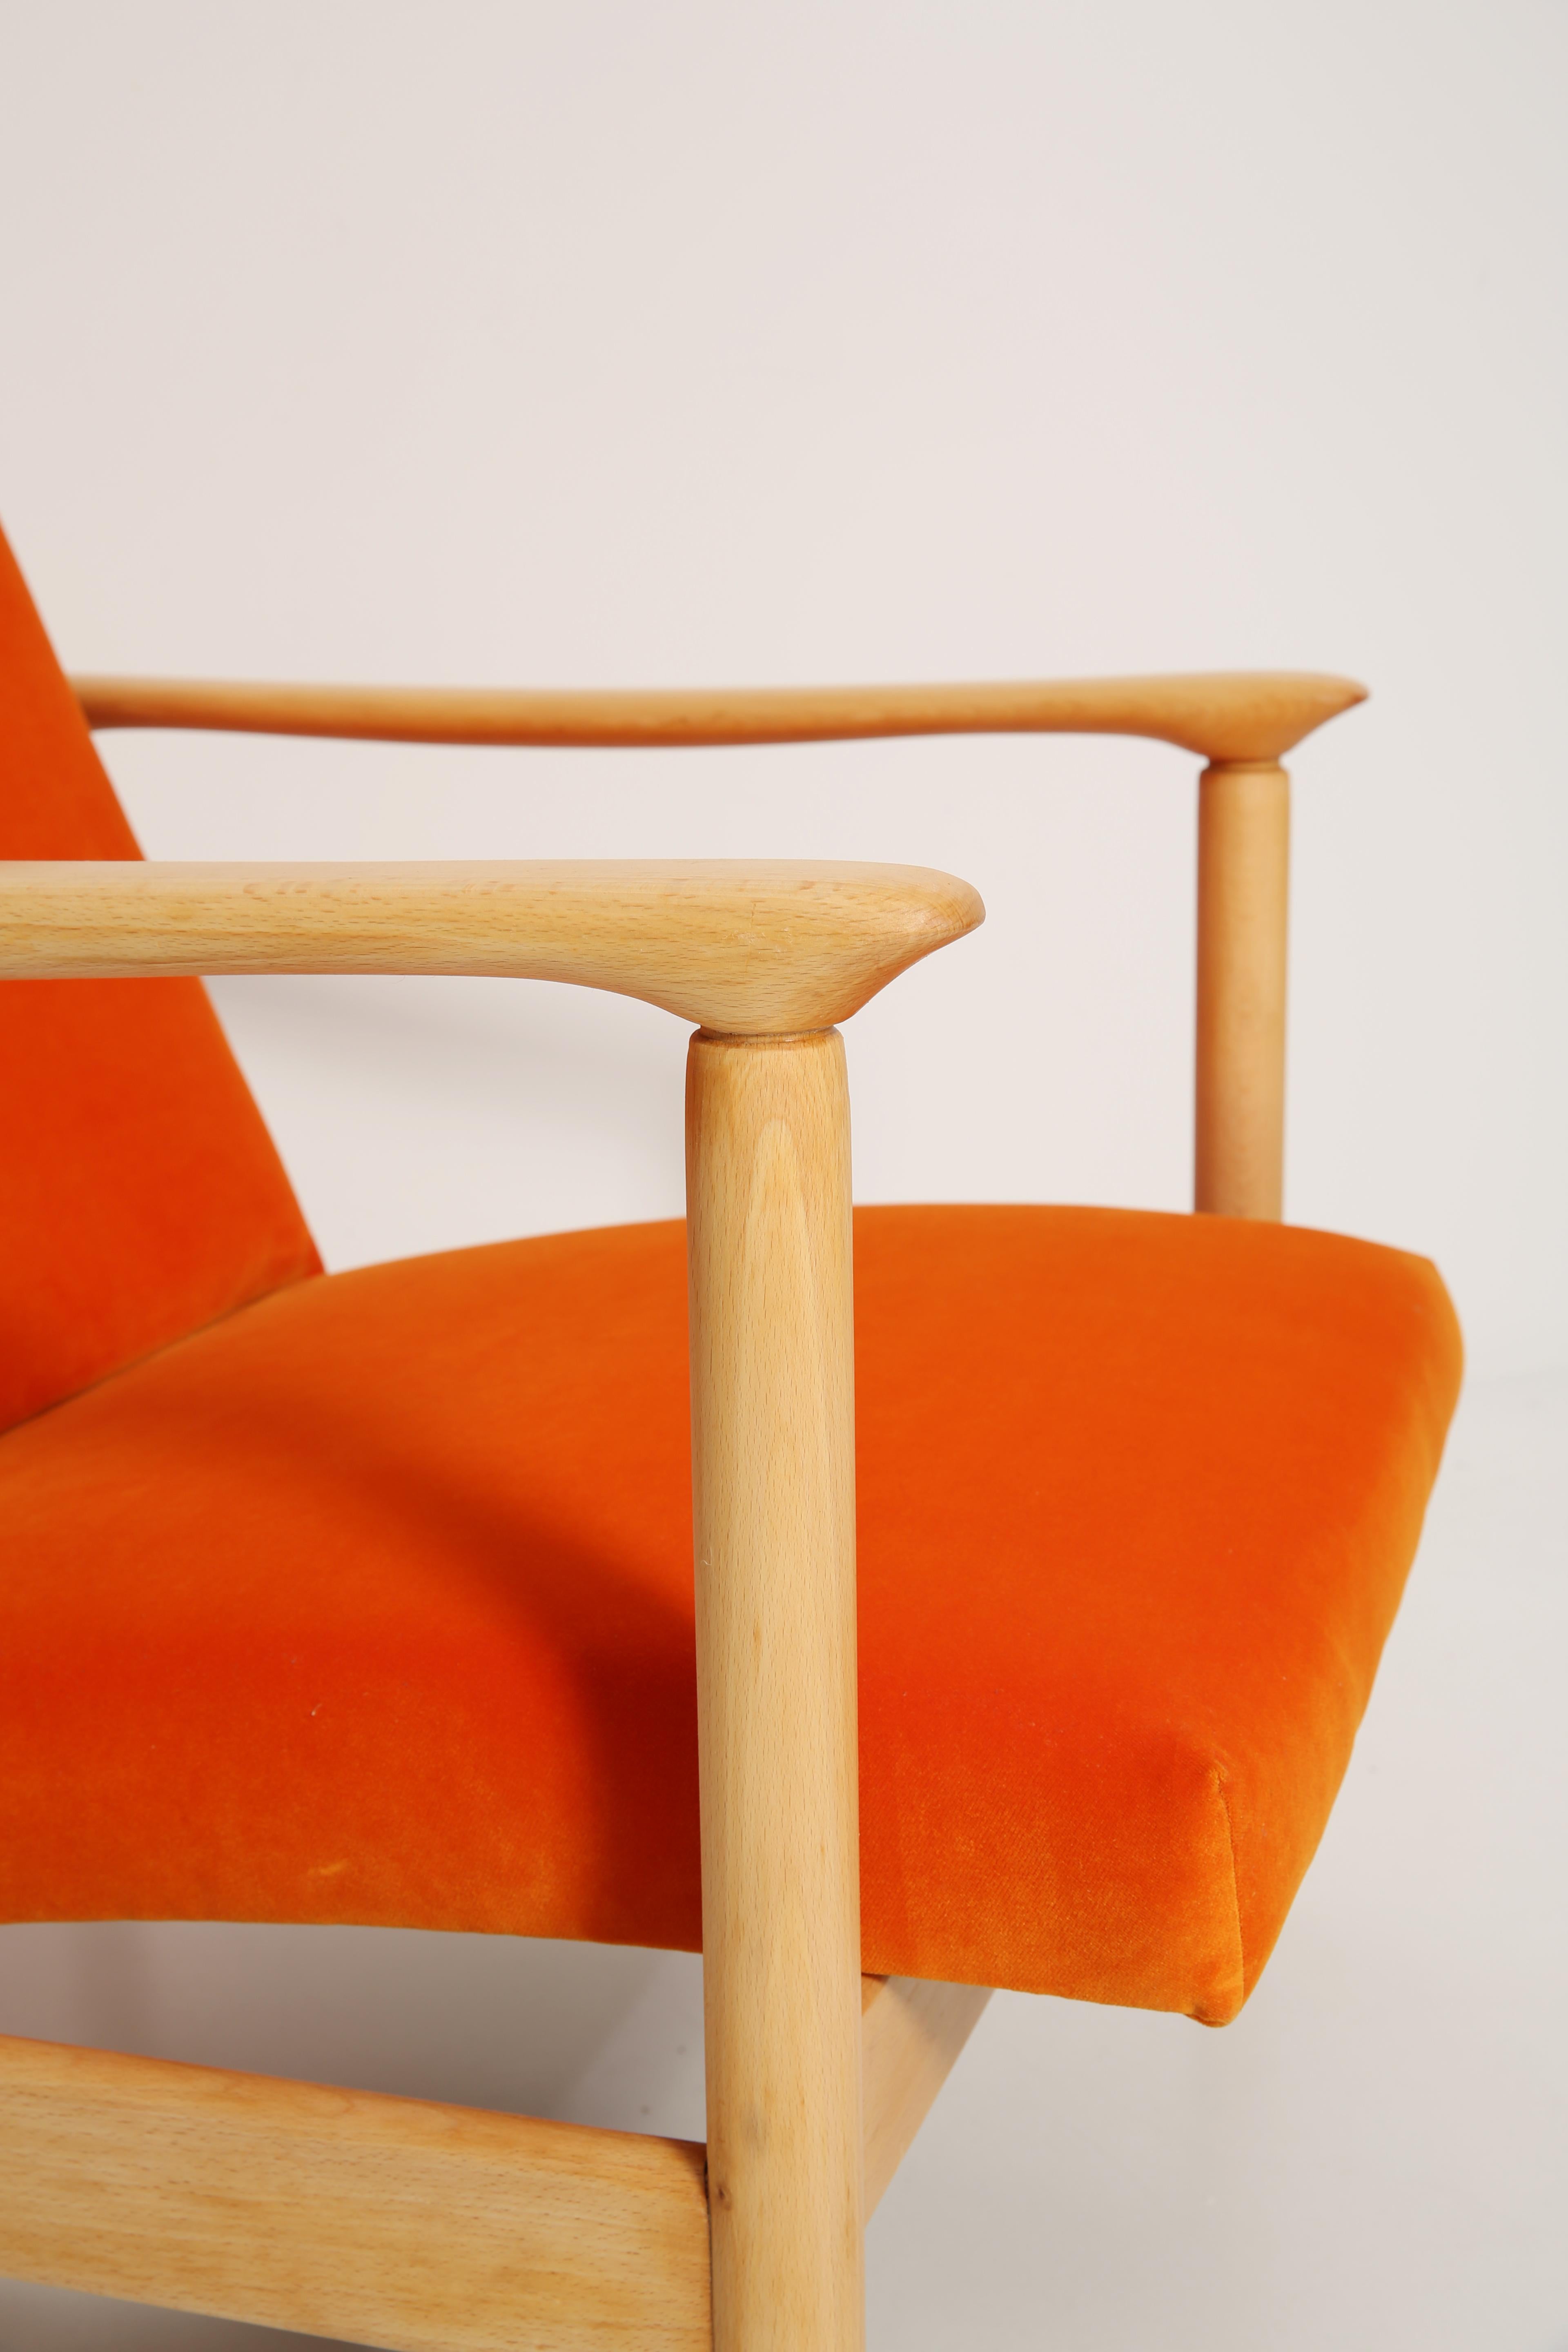 Hand-Crafted Set of Midcentury Orange Velvet Armchairs and Stools, Edmund Homa, Europe, 1960s For Sale